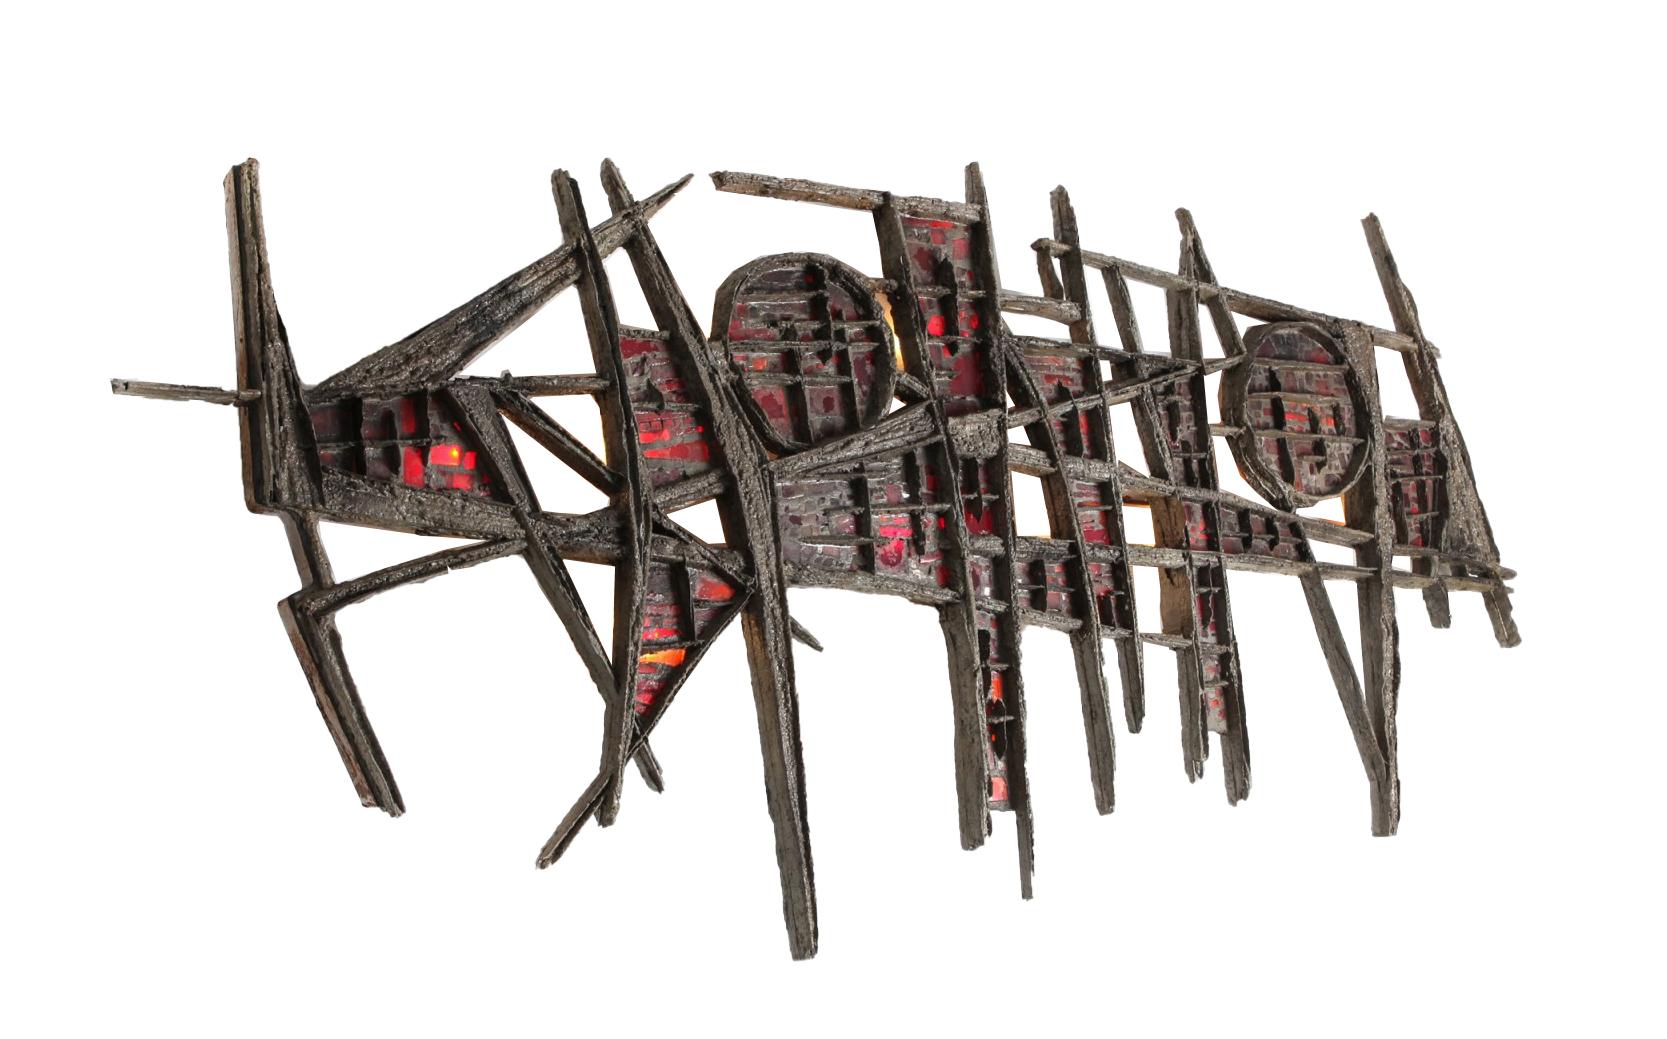 Pia Manu Brutalist Illuminated Wall Sculpture in Steel & Red Stained Glass 1970s For Sale 2